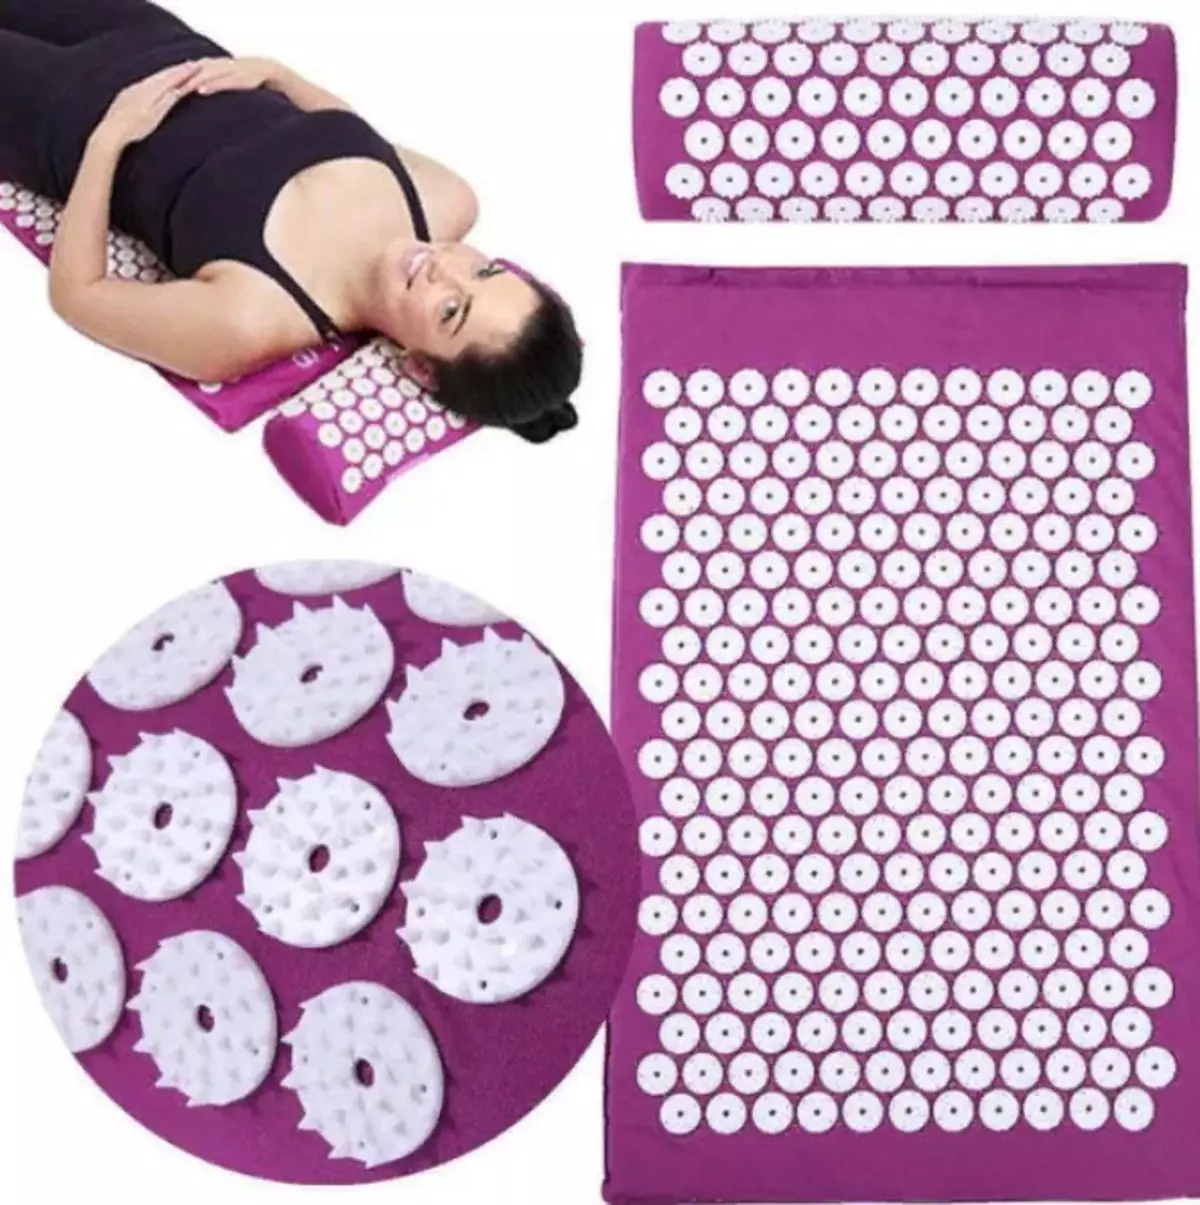 Massage rugs (31 photos): Overview of orthopedic rubber carpet-massager, making with their own hands. How to use them? 16327_6